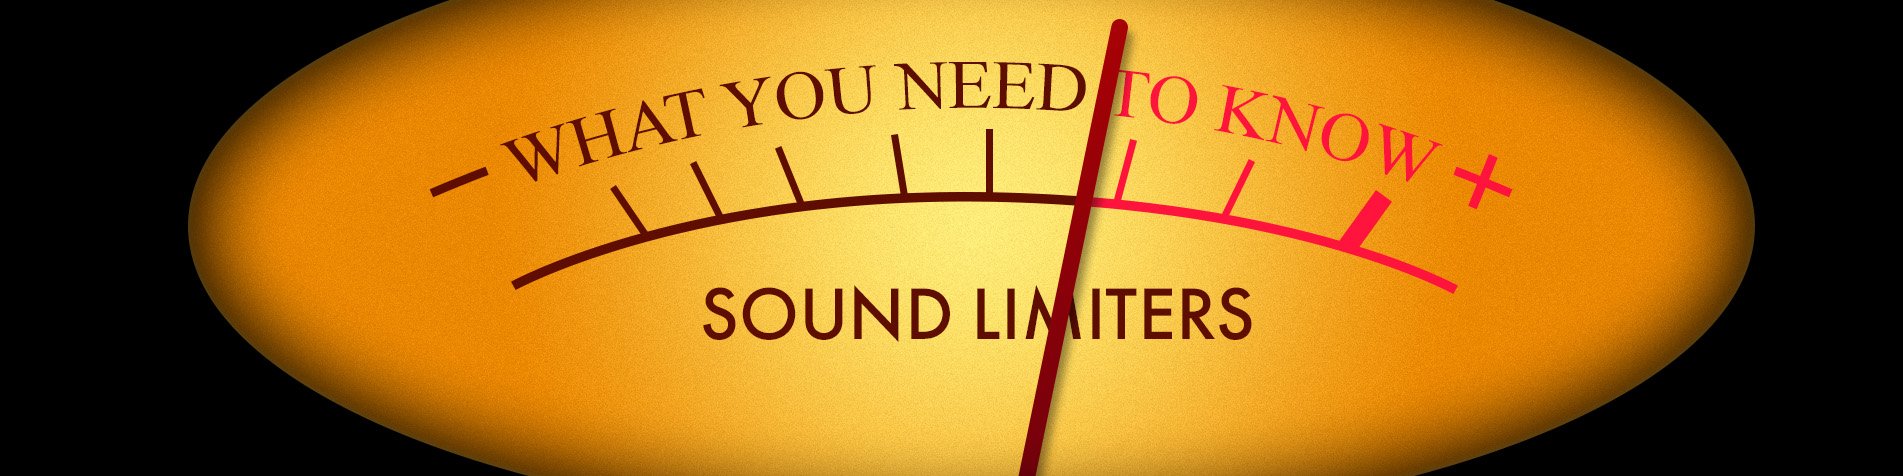 Sound Limiters: What You Need To Know And A Decibel (dB) Loudness Comparison Chart